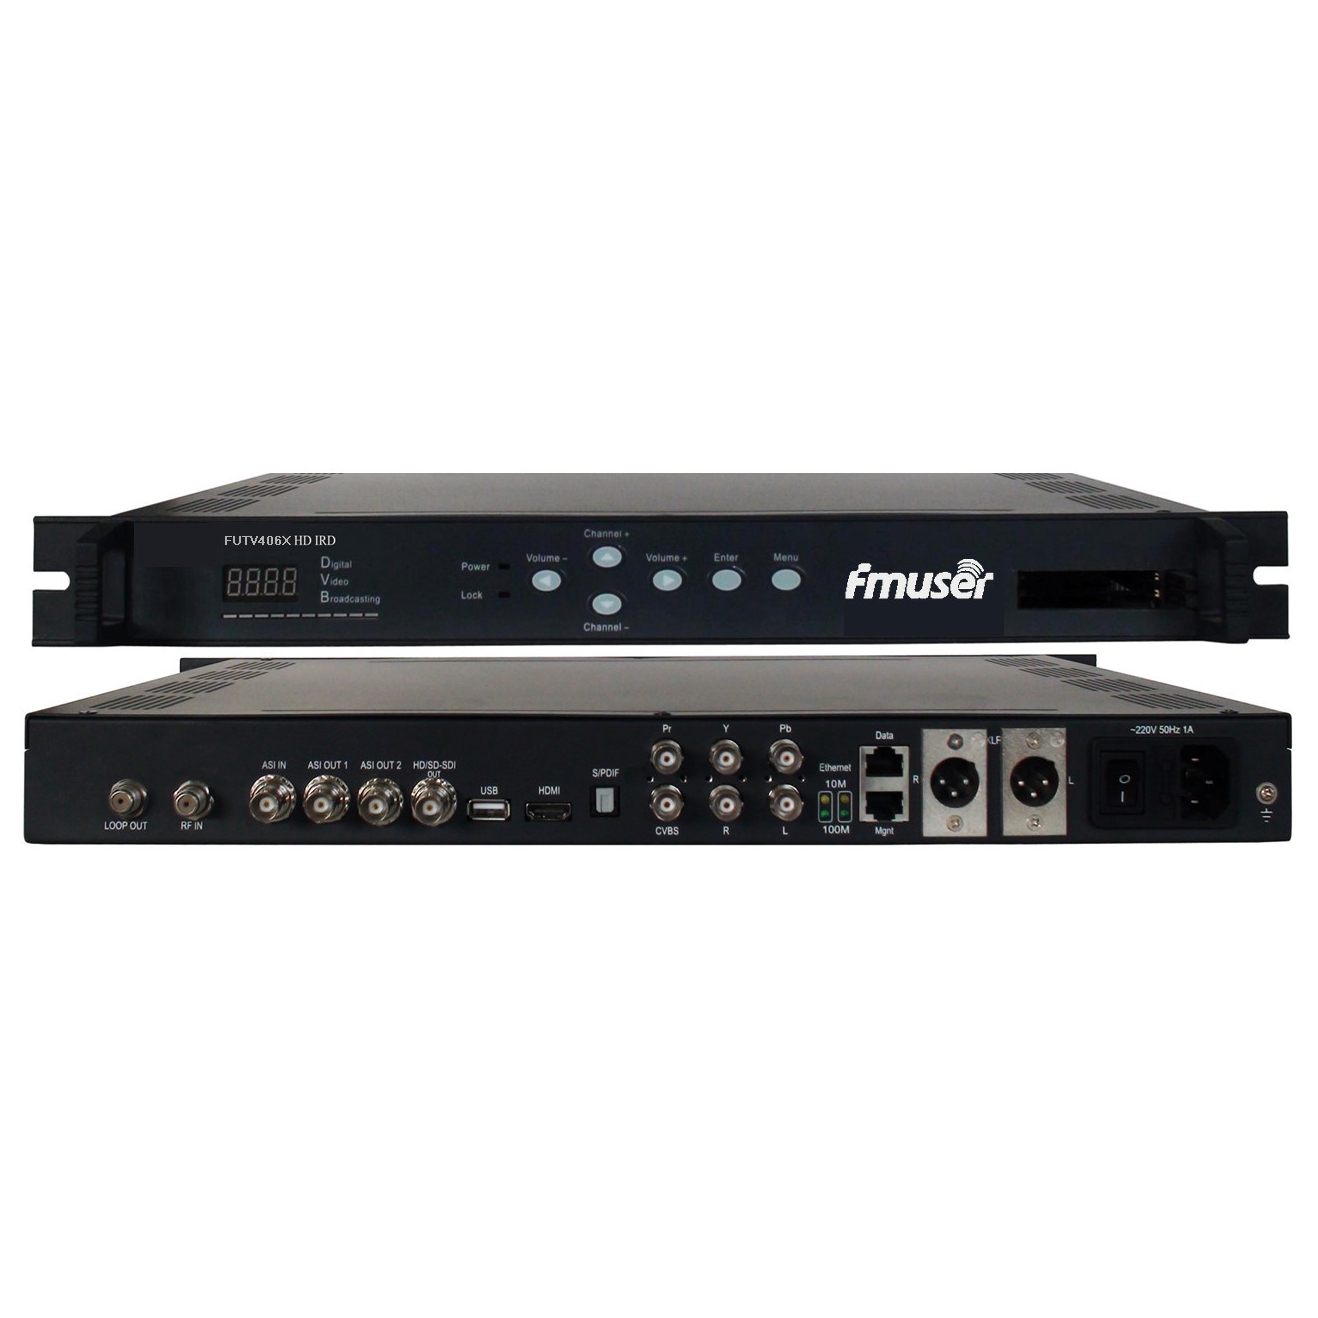 FMUSER FUTV406X HD IRD(1 DVB-S/S2/T/C,ISDB-T RF Input,1 ASI IP In,2 ASI 1 IP Output,HDMI SDI CVBS XLR Out)with MUX＆BISS